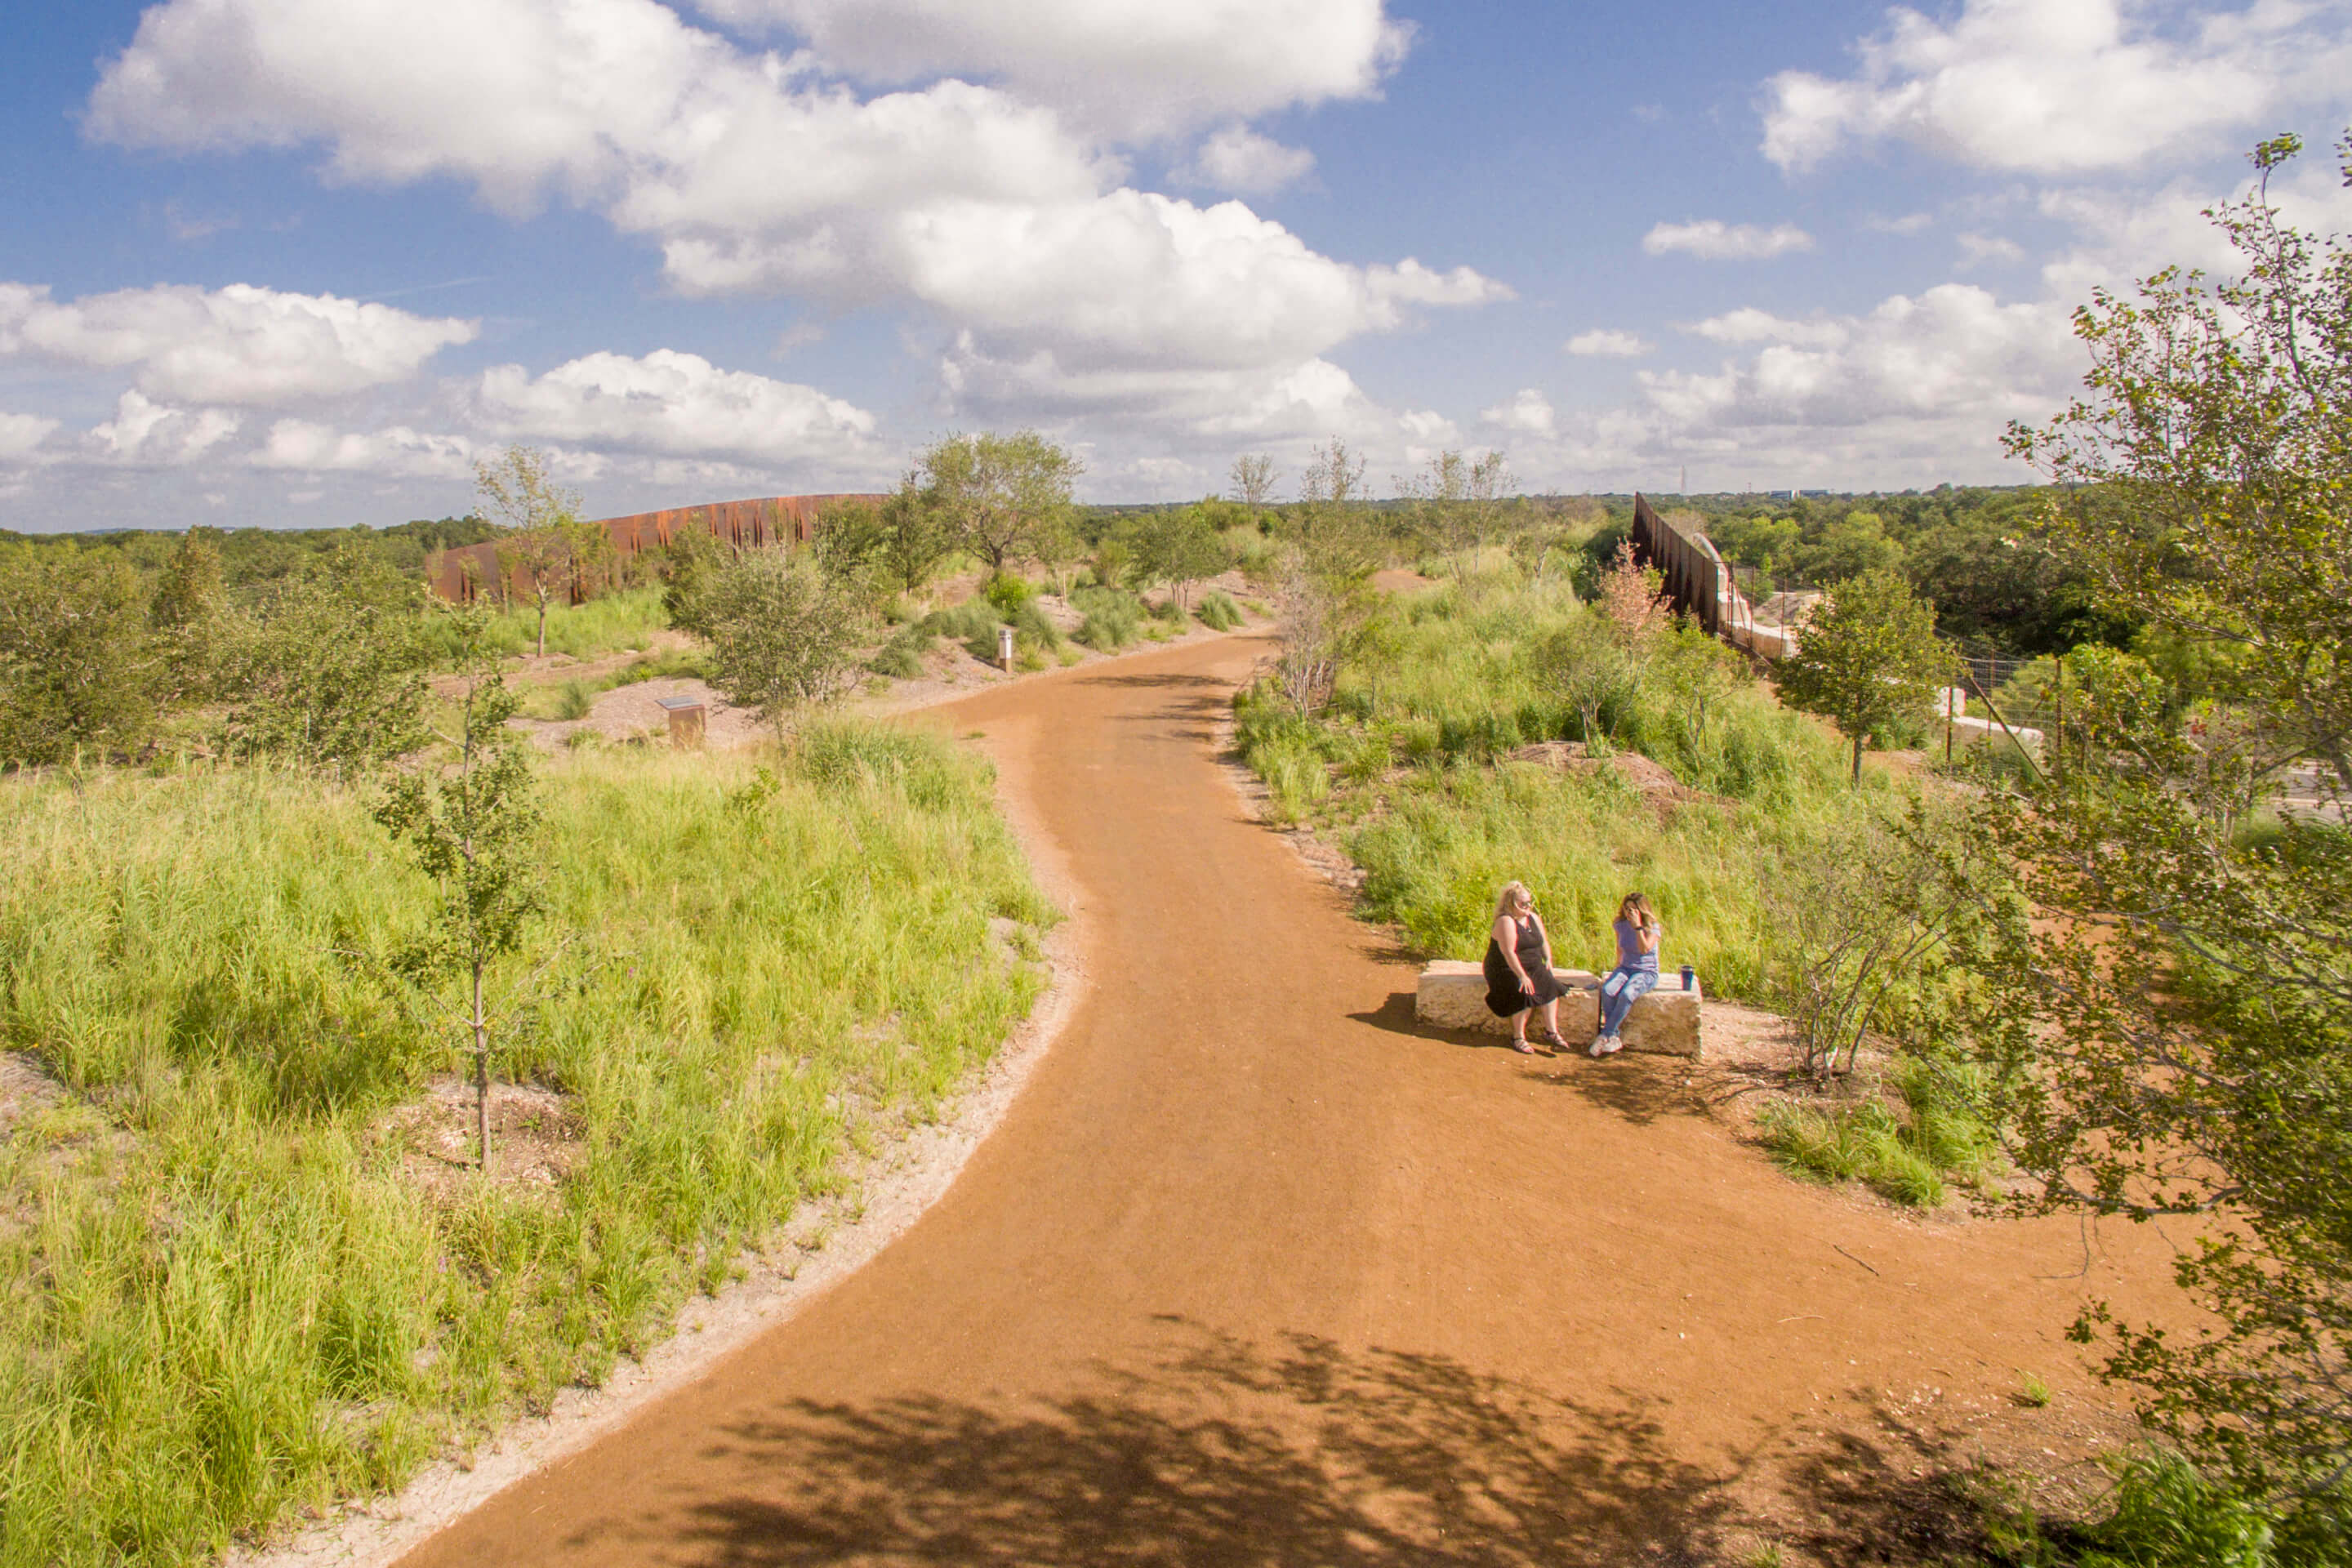 People relaxing on rocks along a dirt path